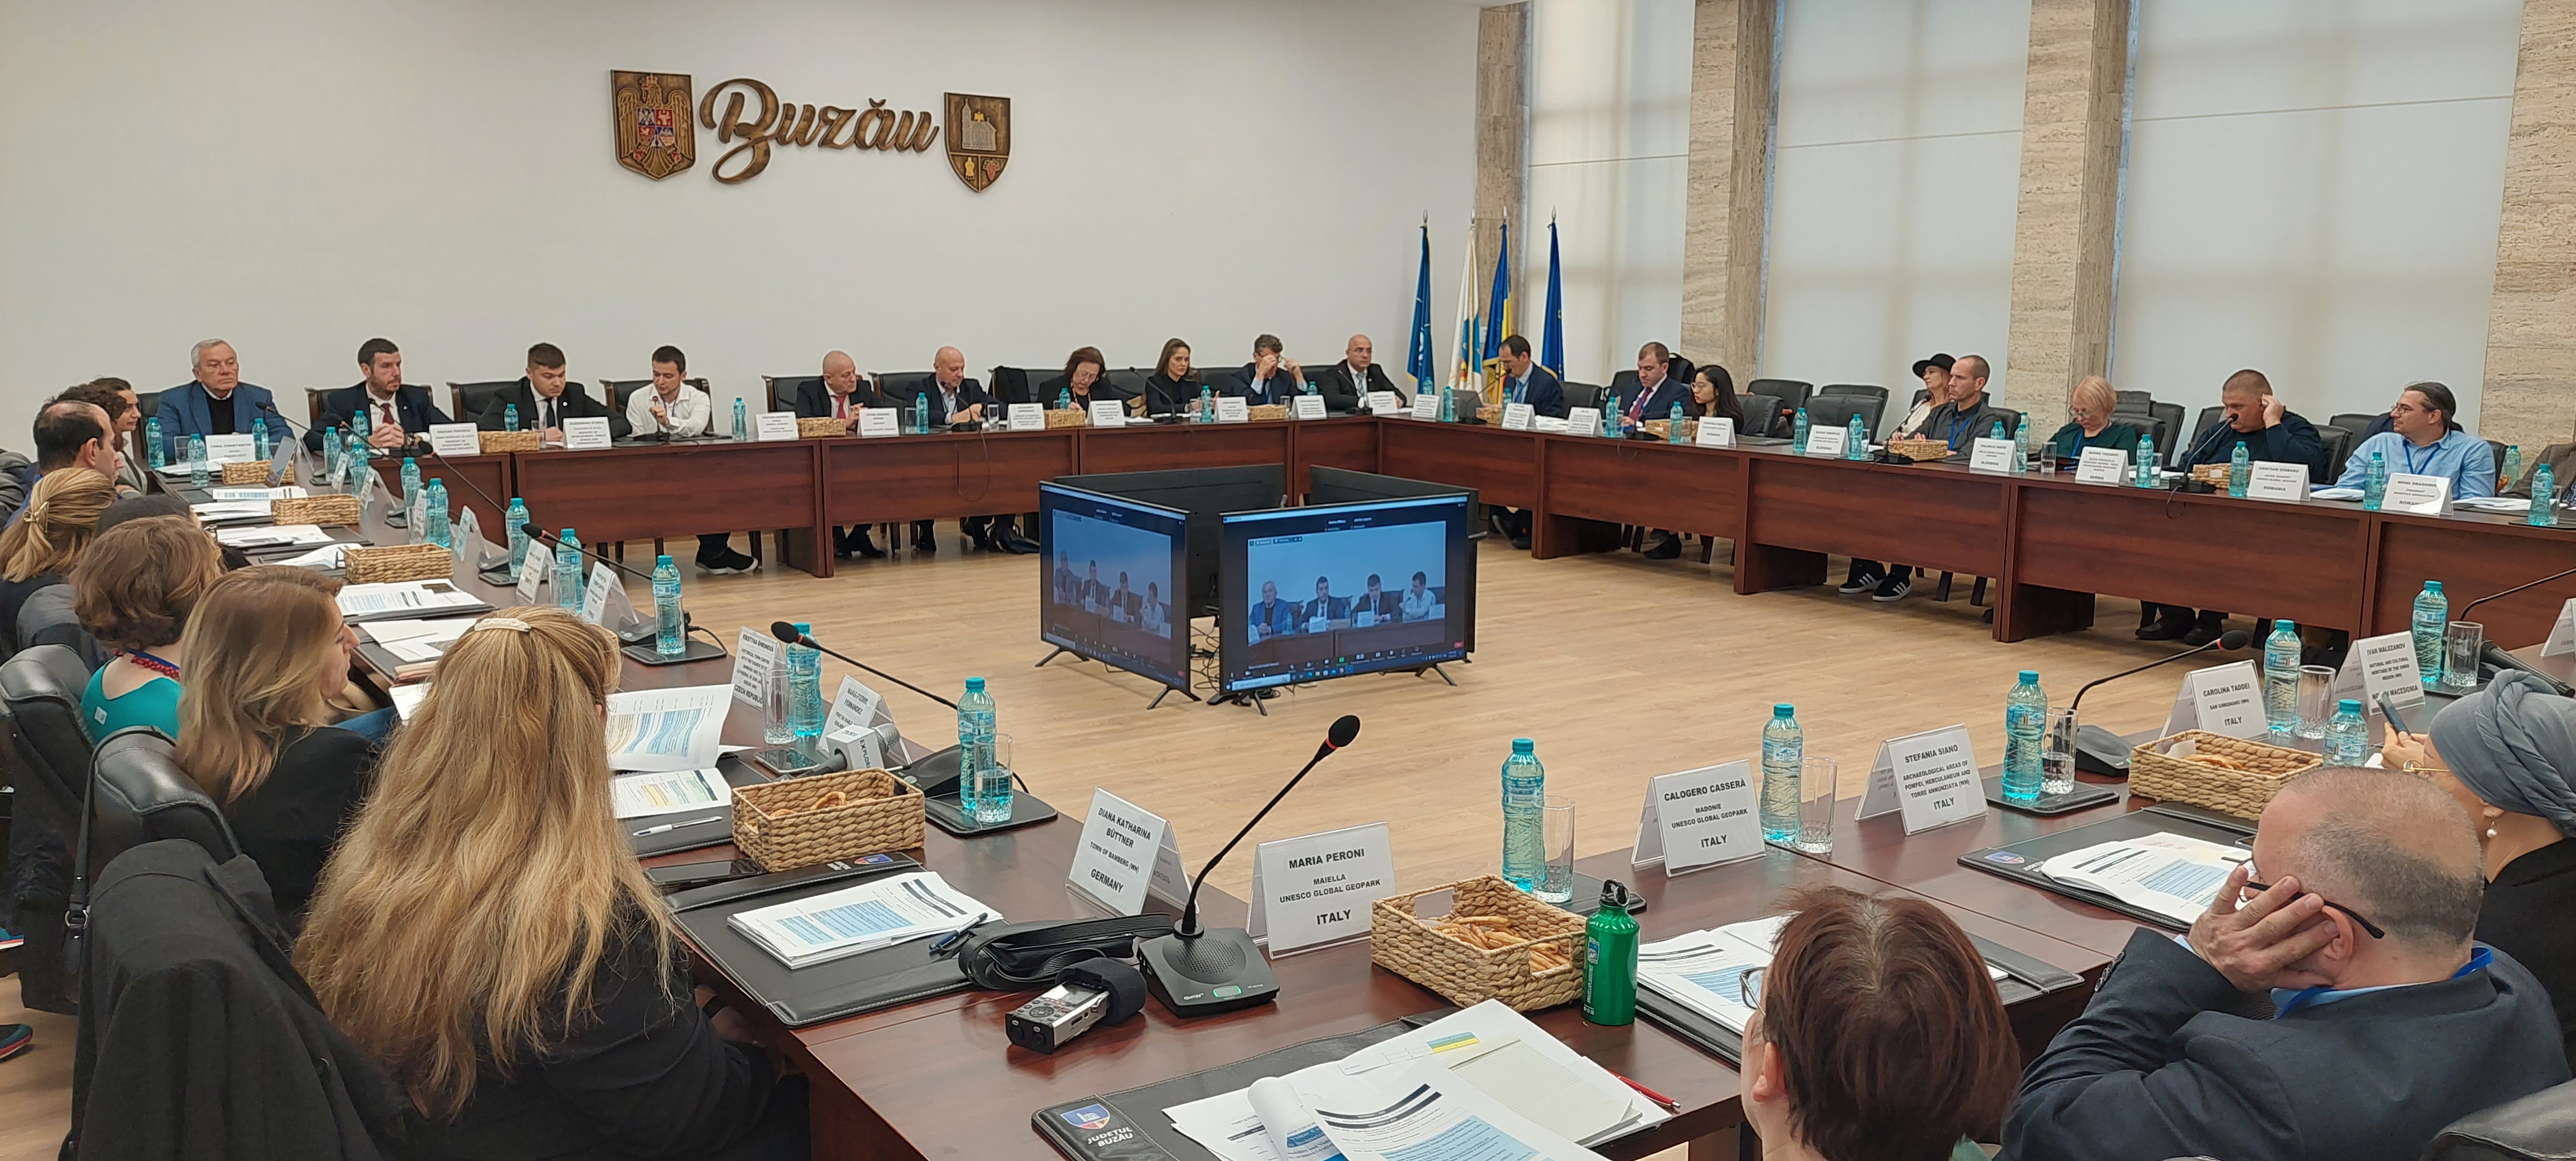 Meeting of the European Network of Geoparks in Hateg